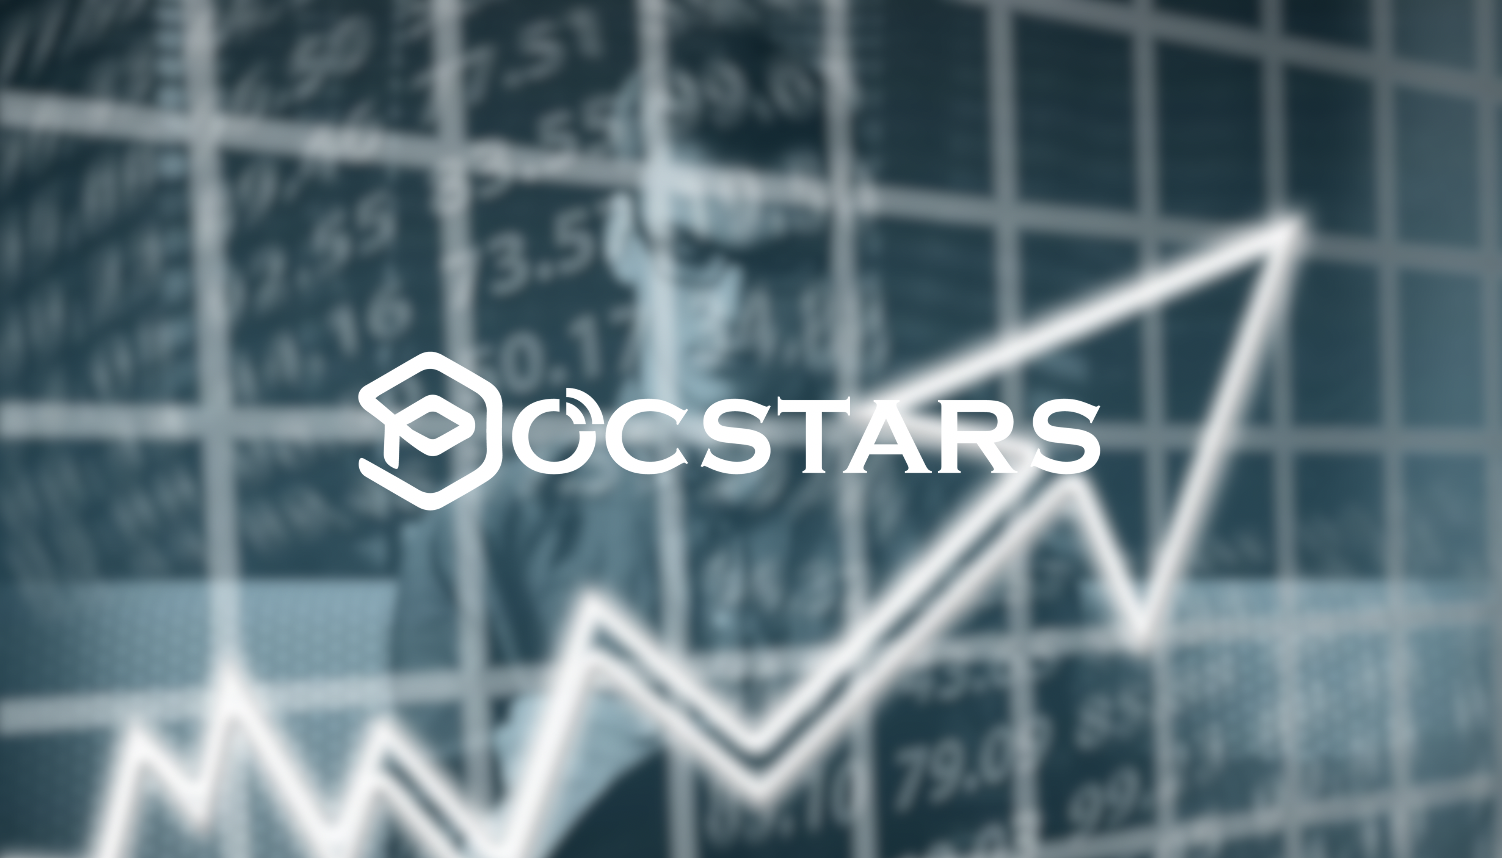 POCSTARS Sees Record Growth in Overseas Markets 